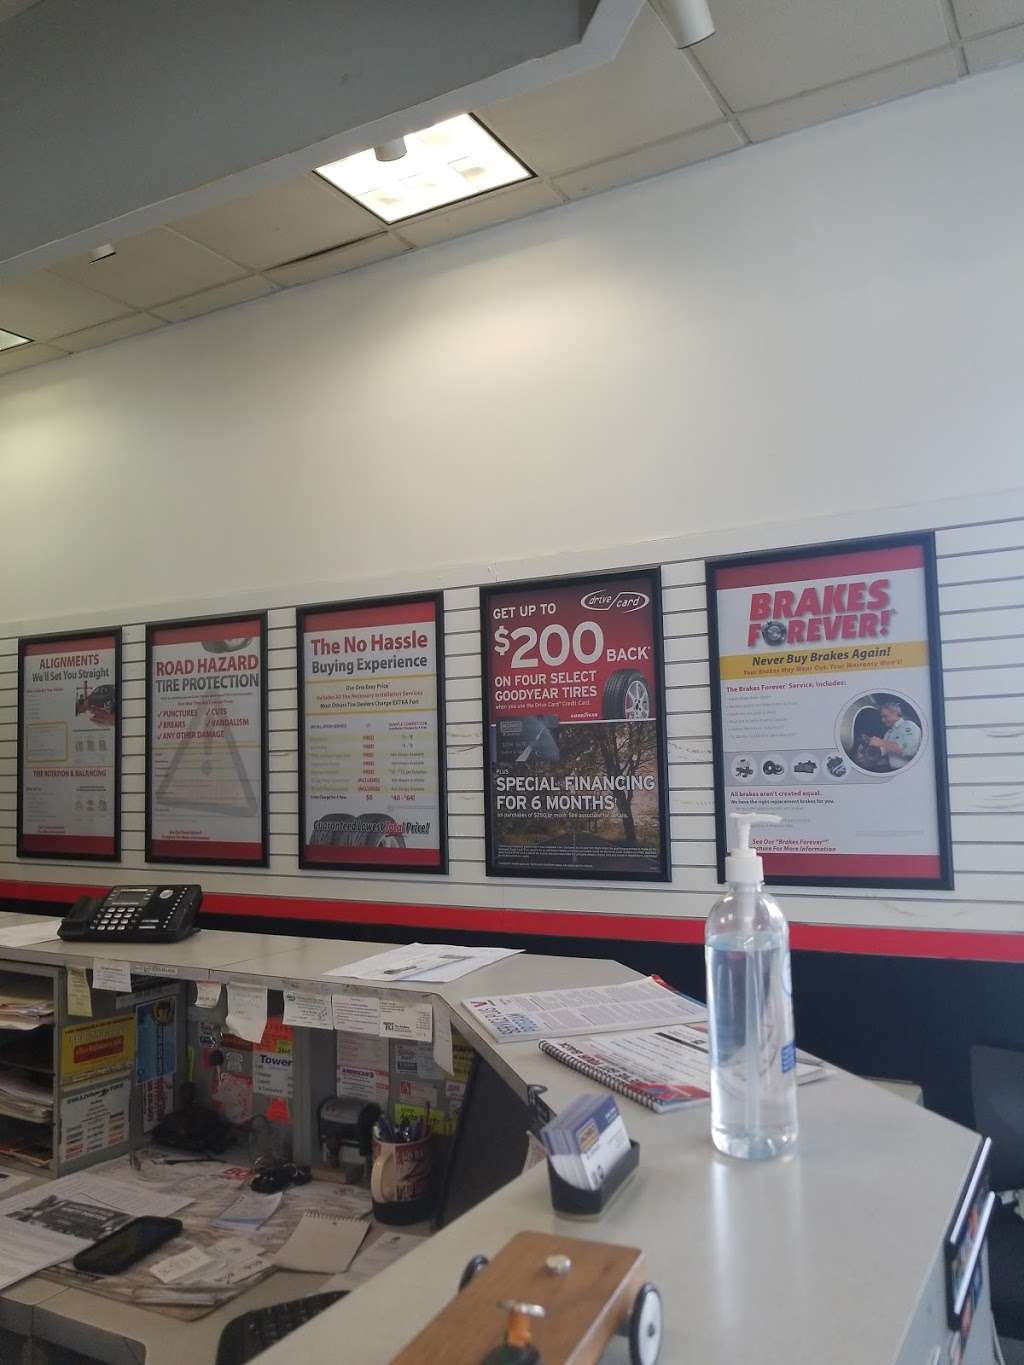 Monro Auto Service And Tire Centers | 348 Daniel Webster Hwy, Merrimack, NH 03054, USA | Phone: (603) 397-3709